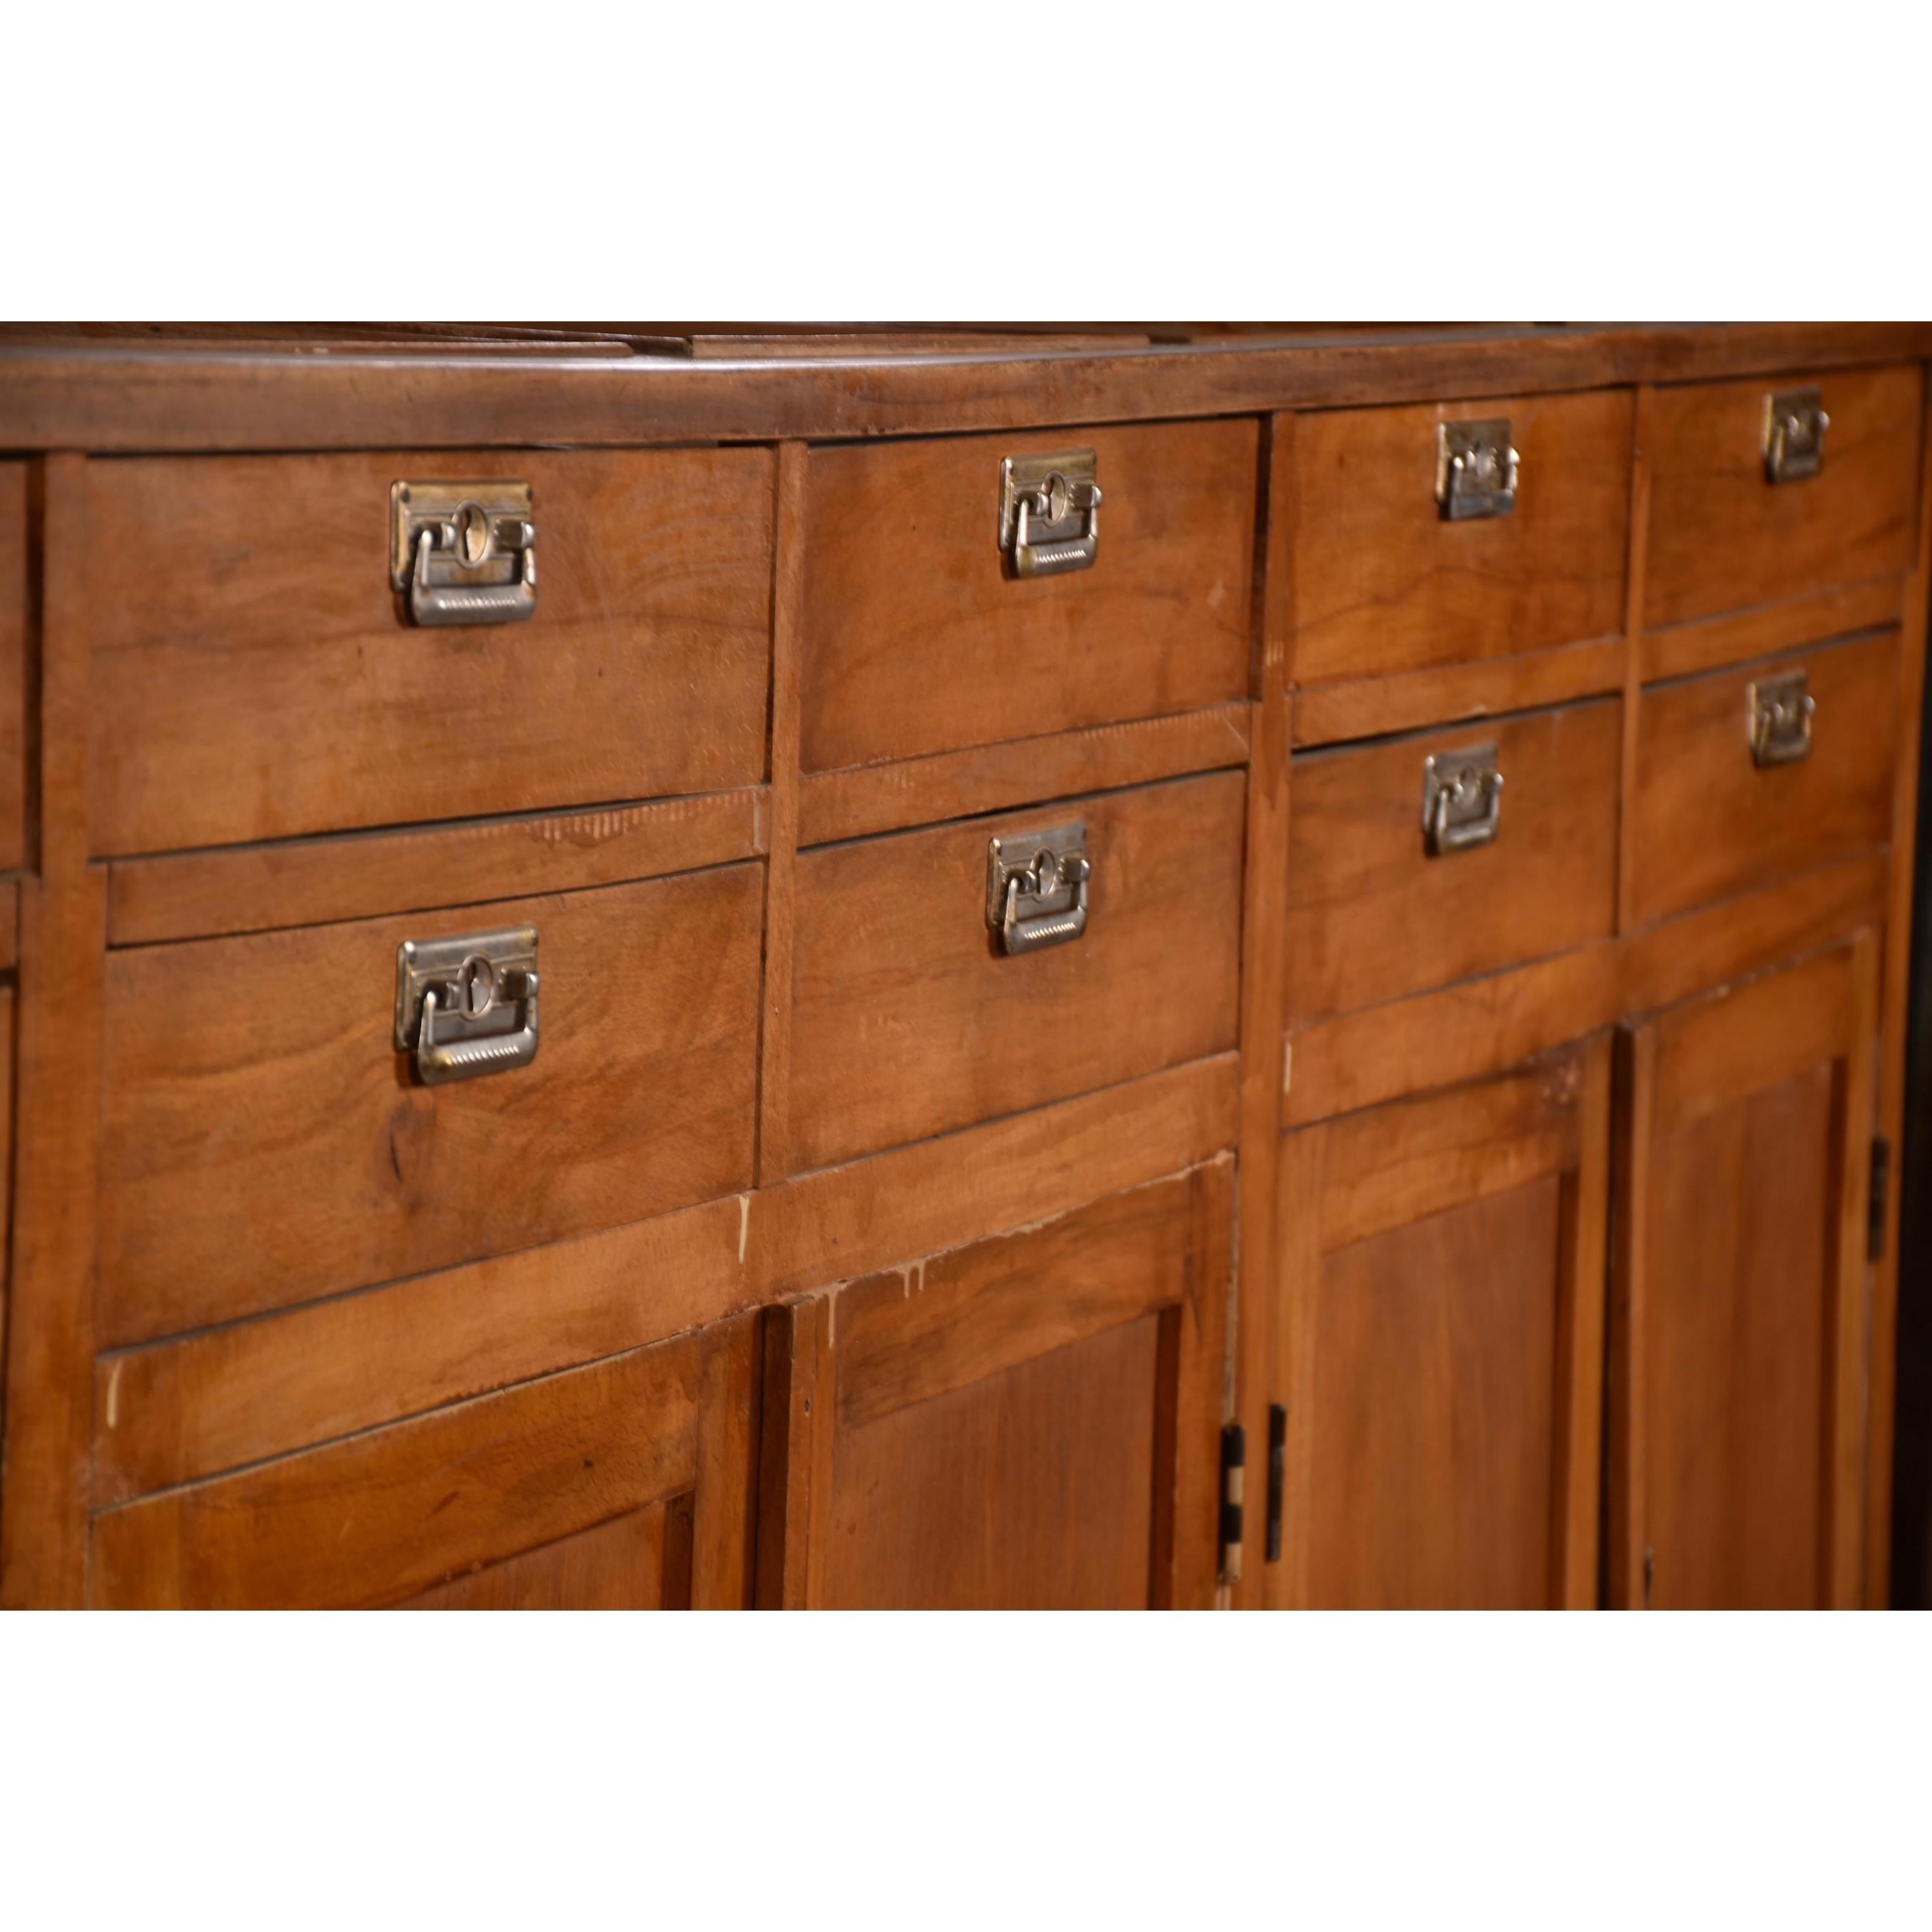 Apothecary Haberdashery Display Counter Sideboard circa 1930s Number 13 3